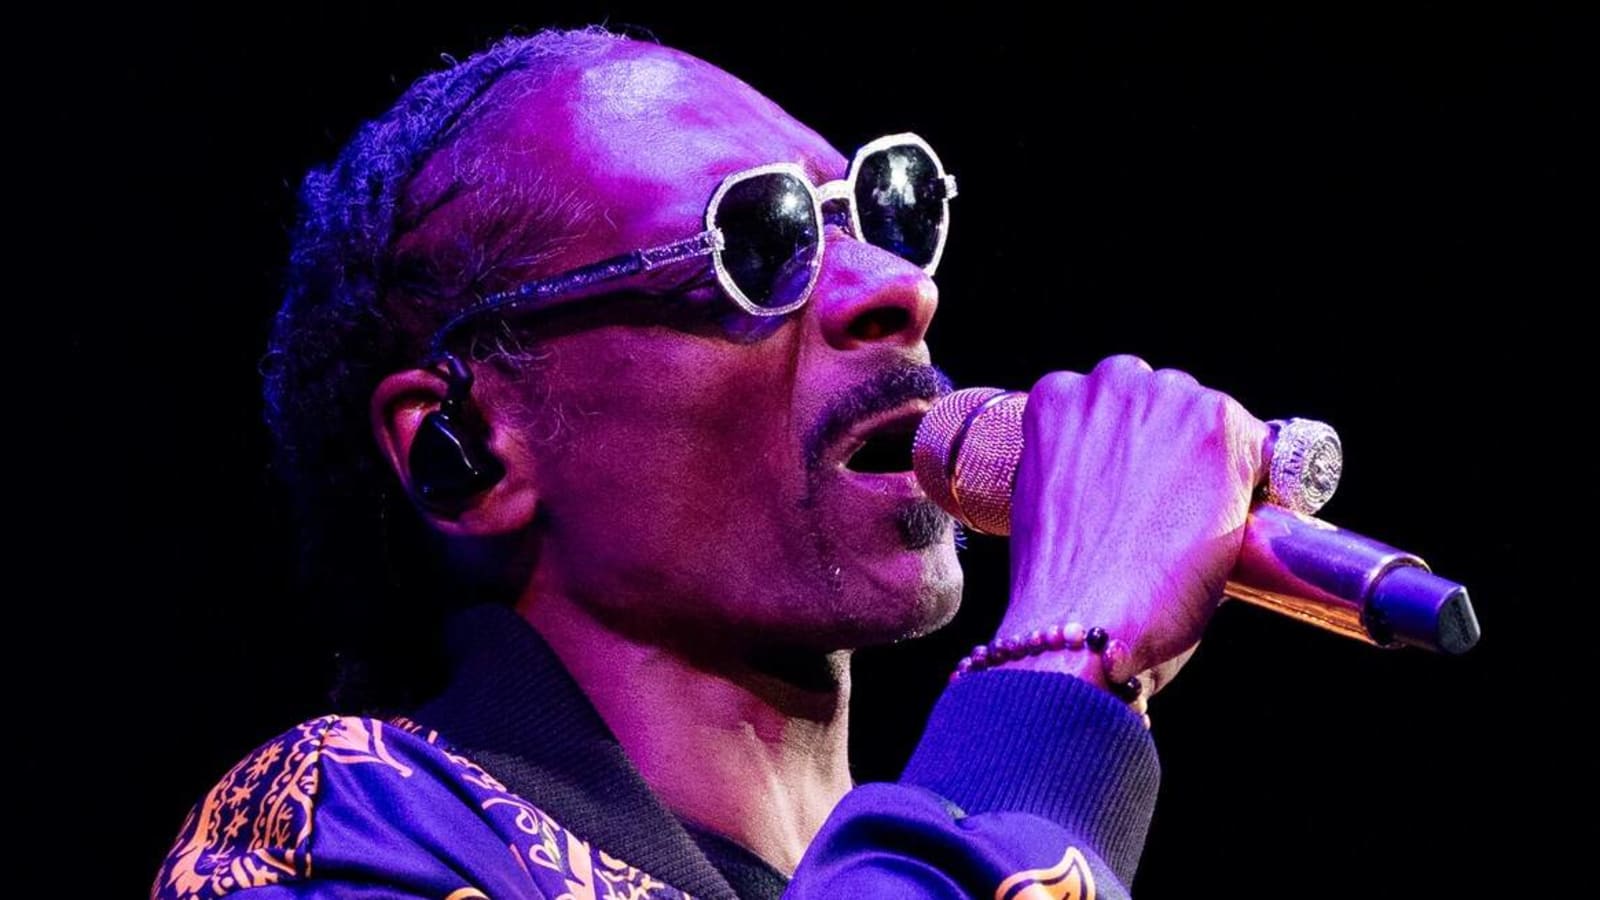 Snoop Dogg to be title sponsor of college football bowl game